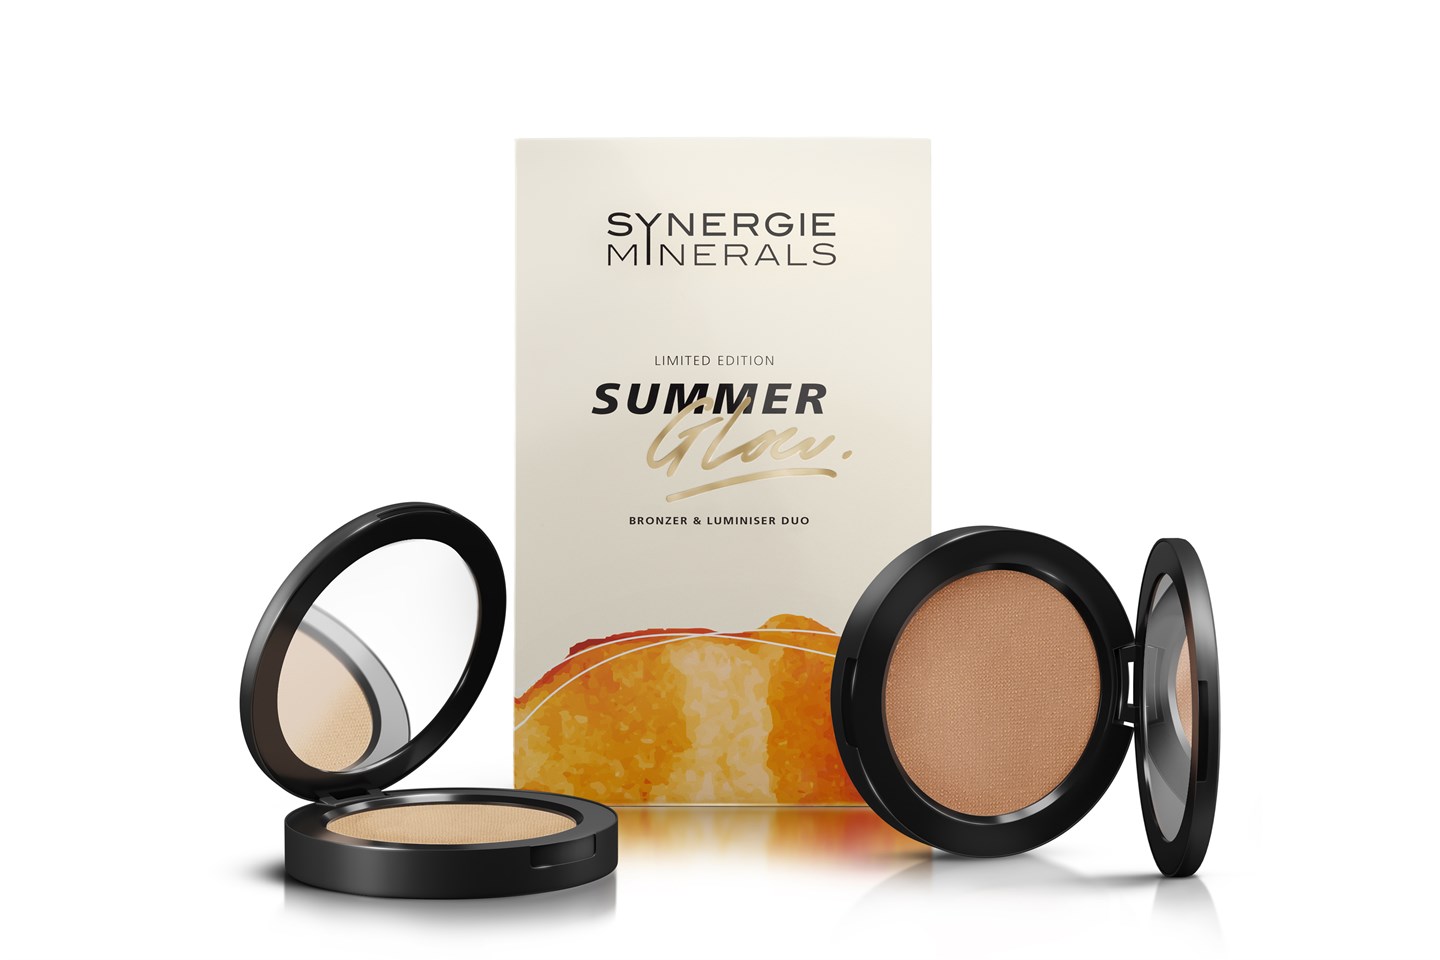 Synergie Minerals Summer Glow Pack